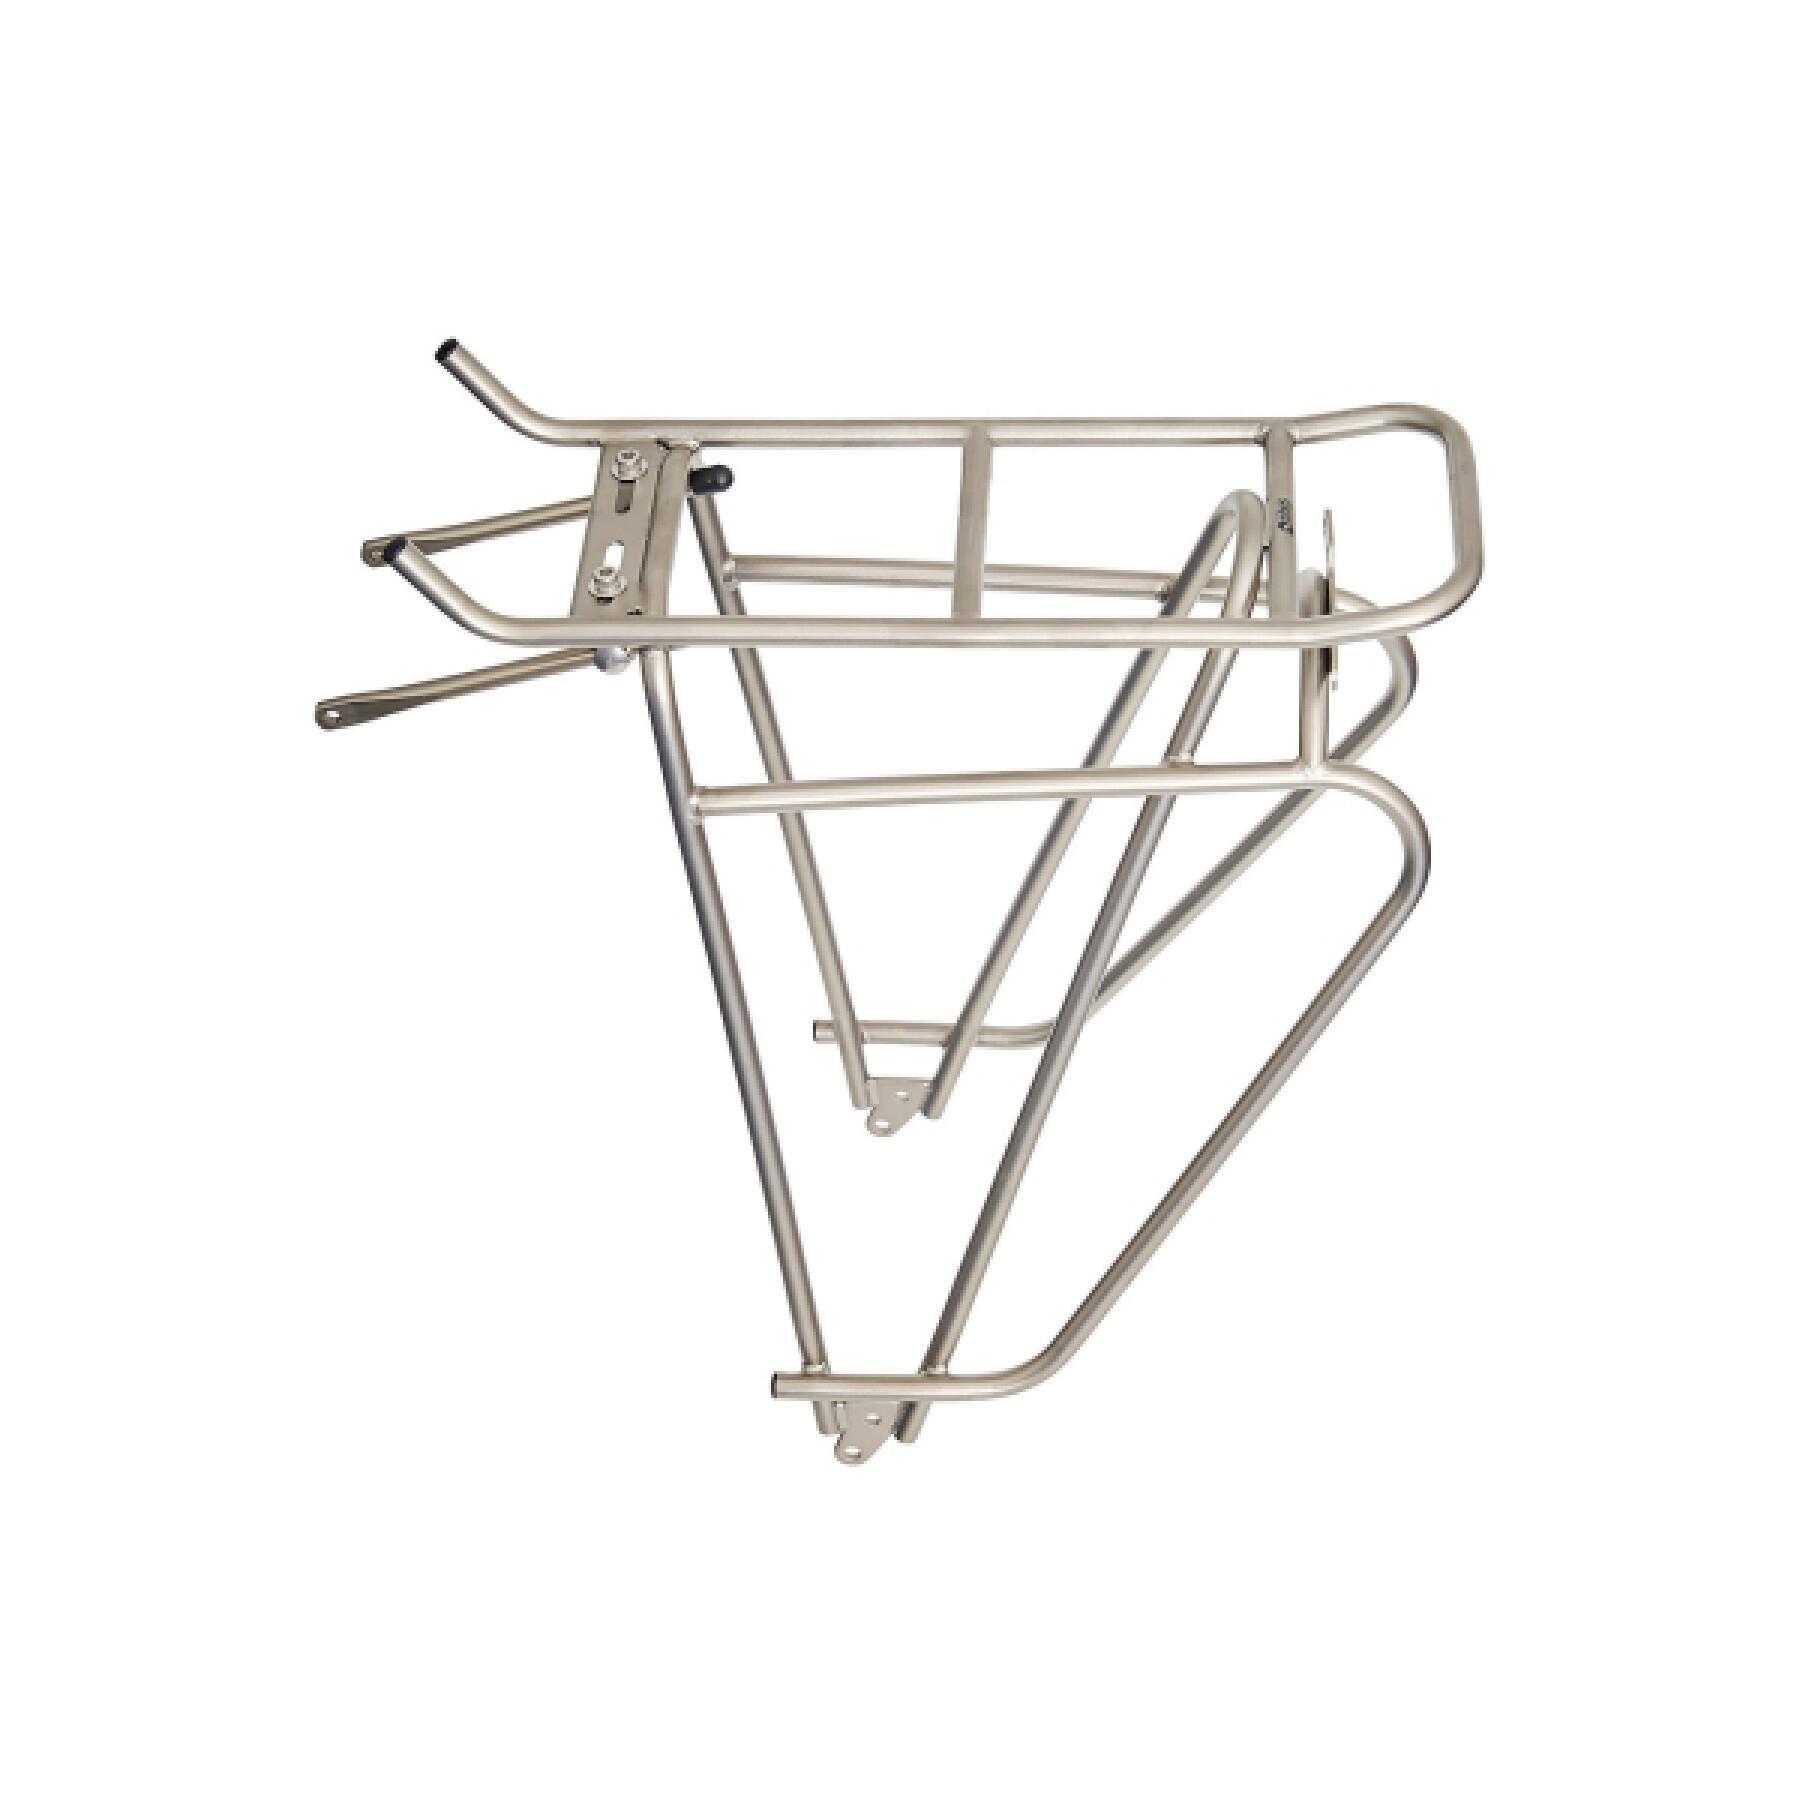 Stainless steel luggage rack Tubus Cosmo